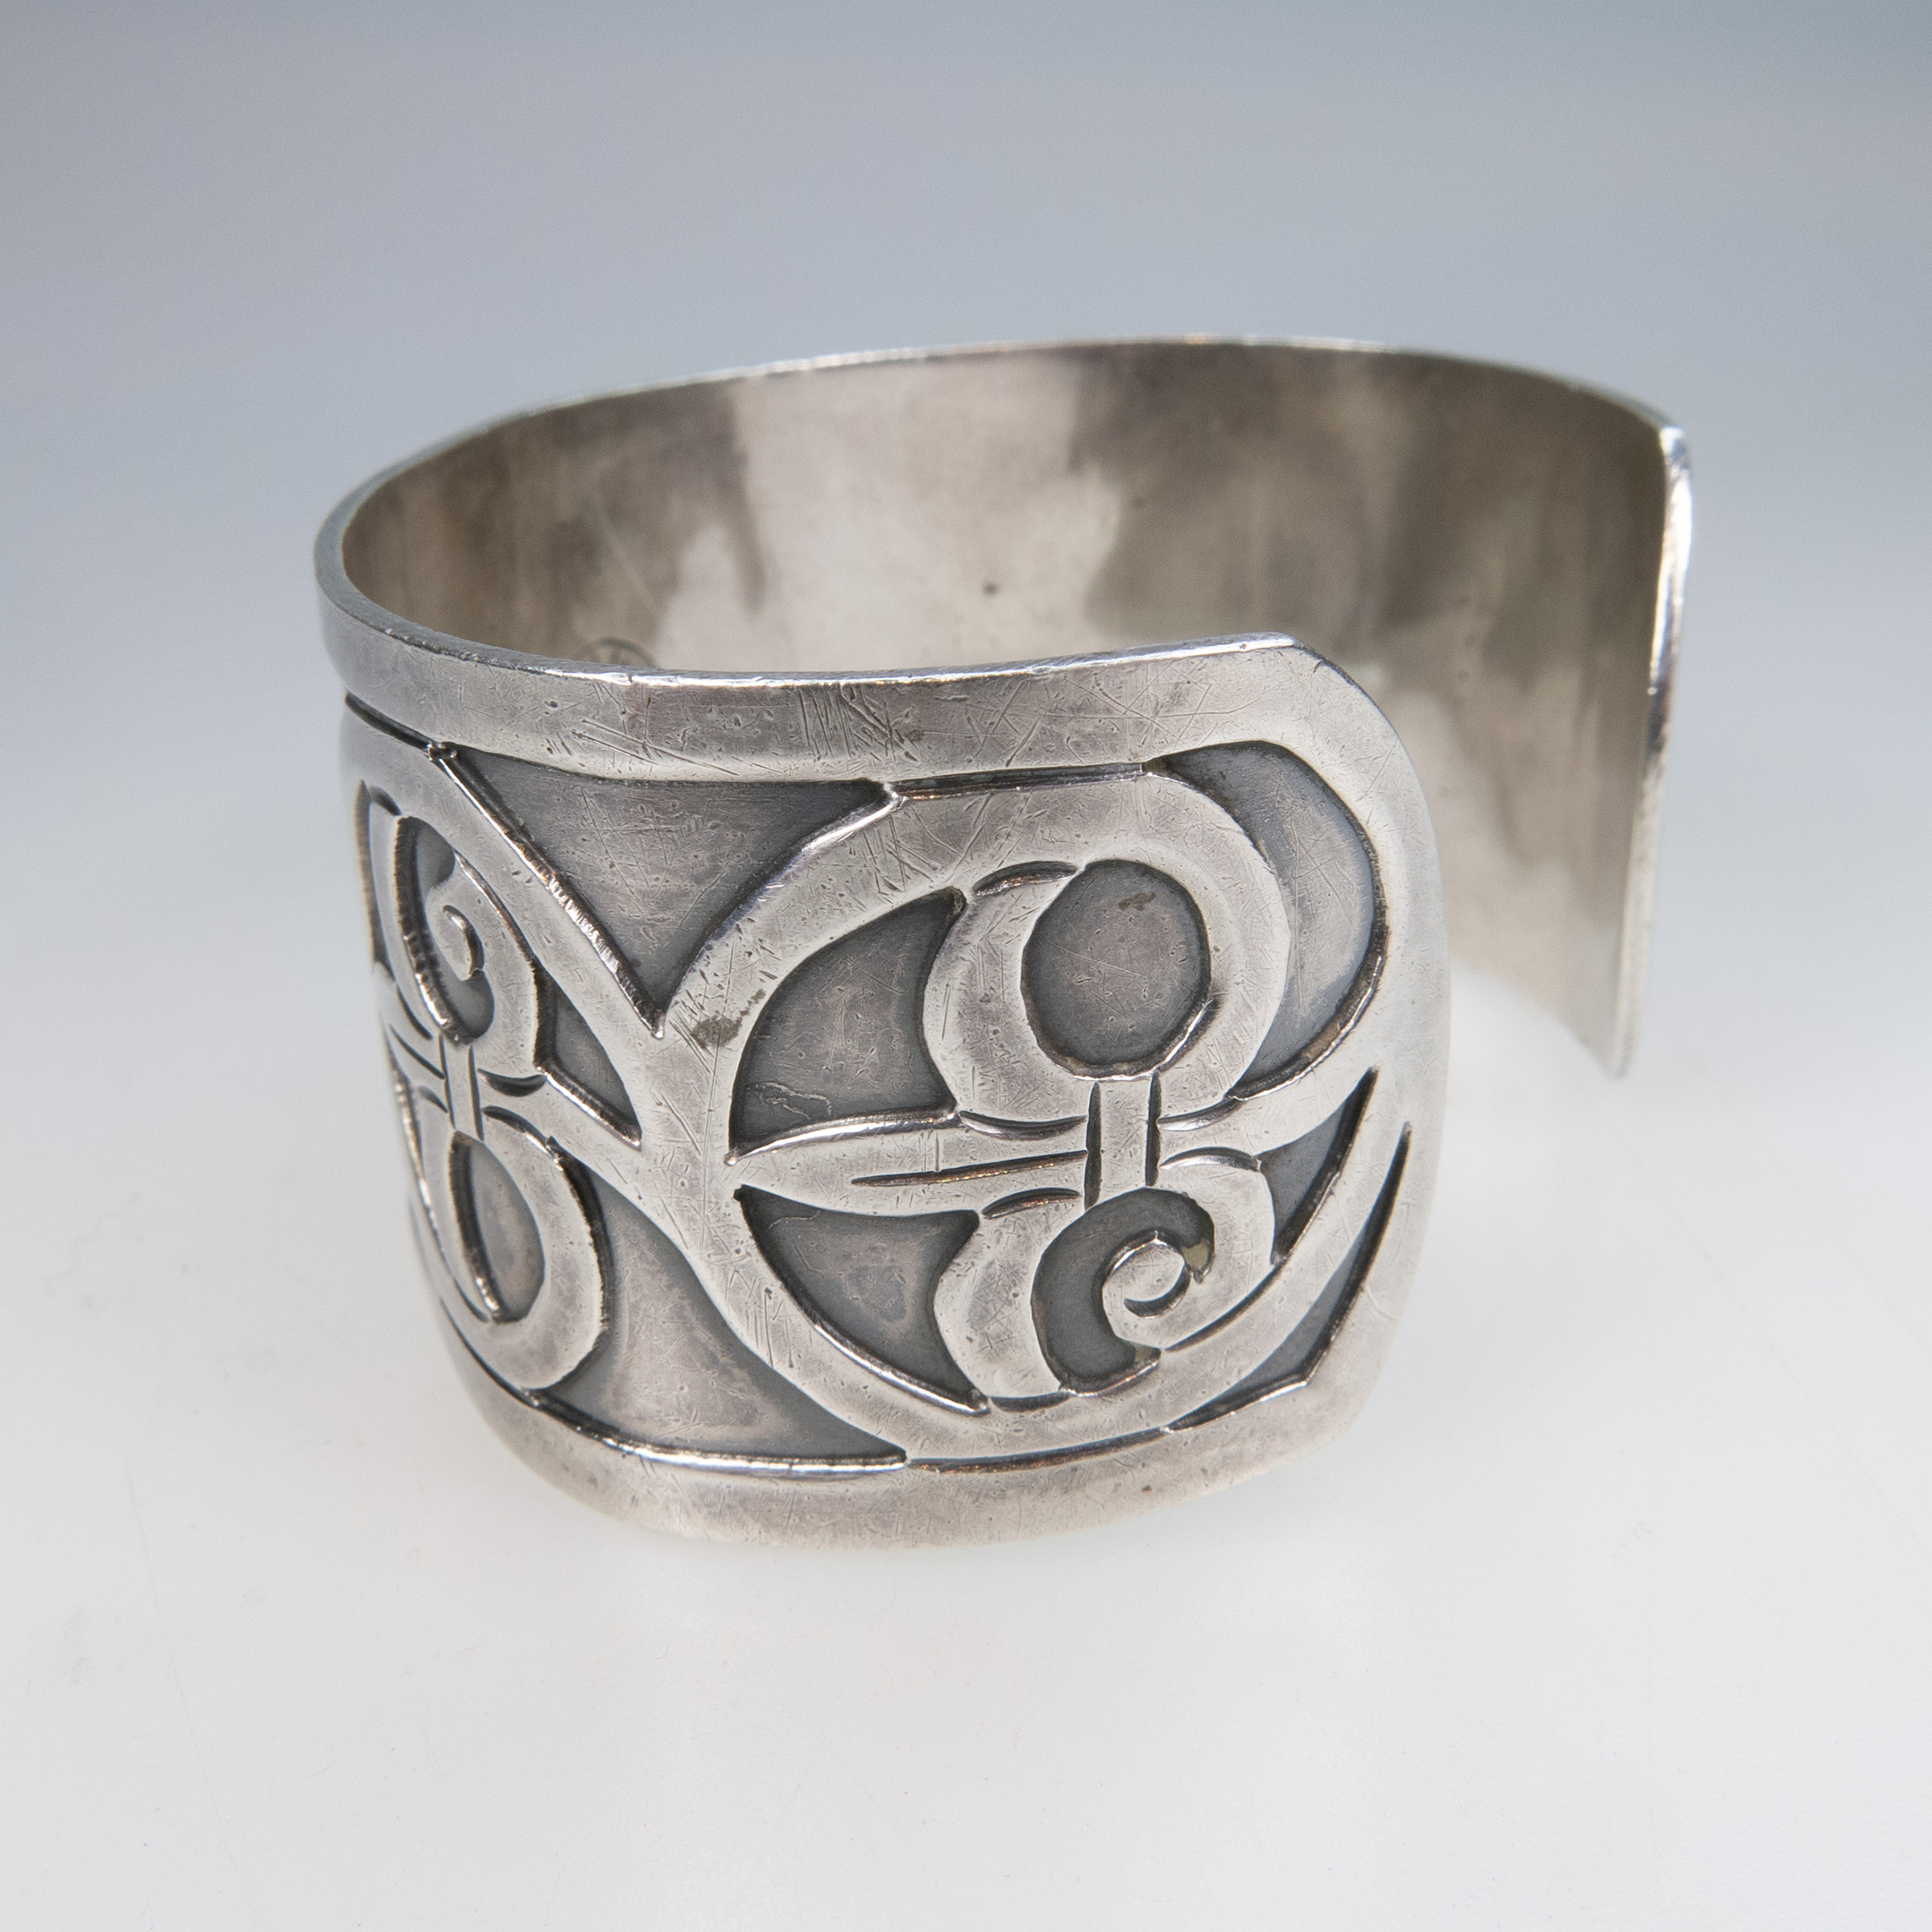 Bernice Goodspeed Mexican Sterling Silver Open Cuff Bangle